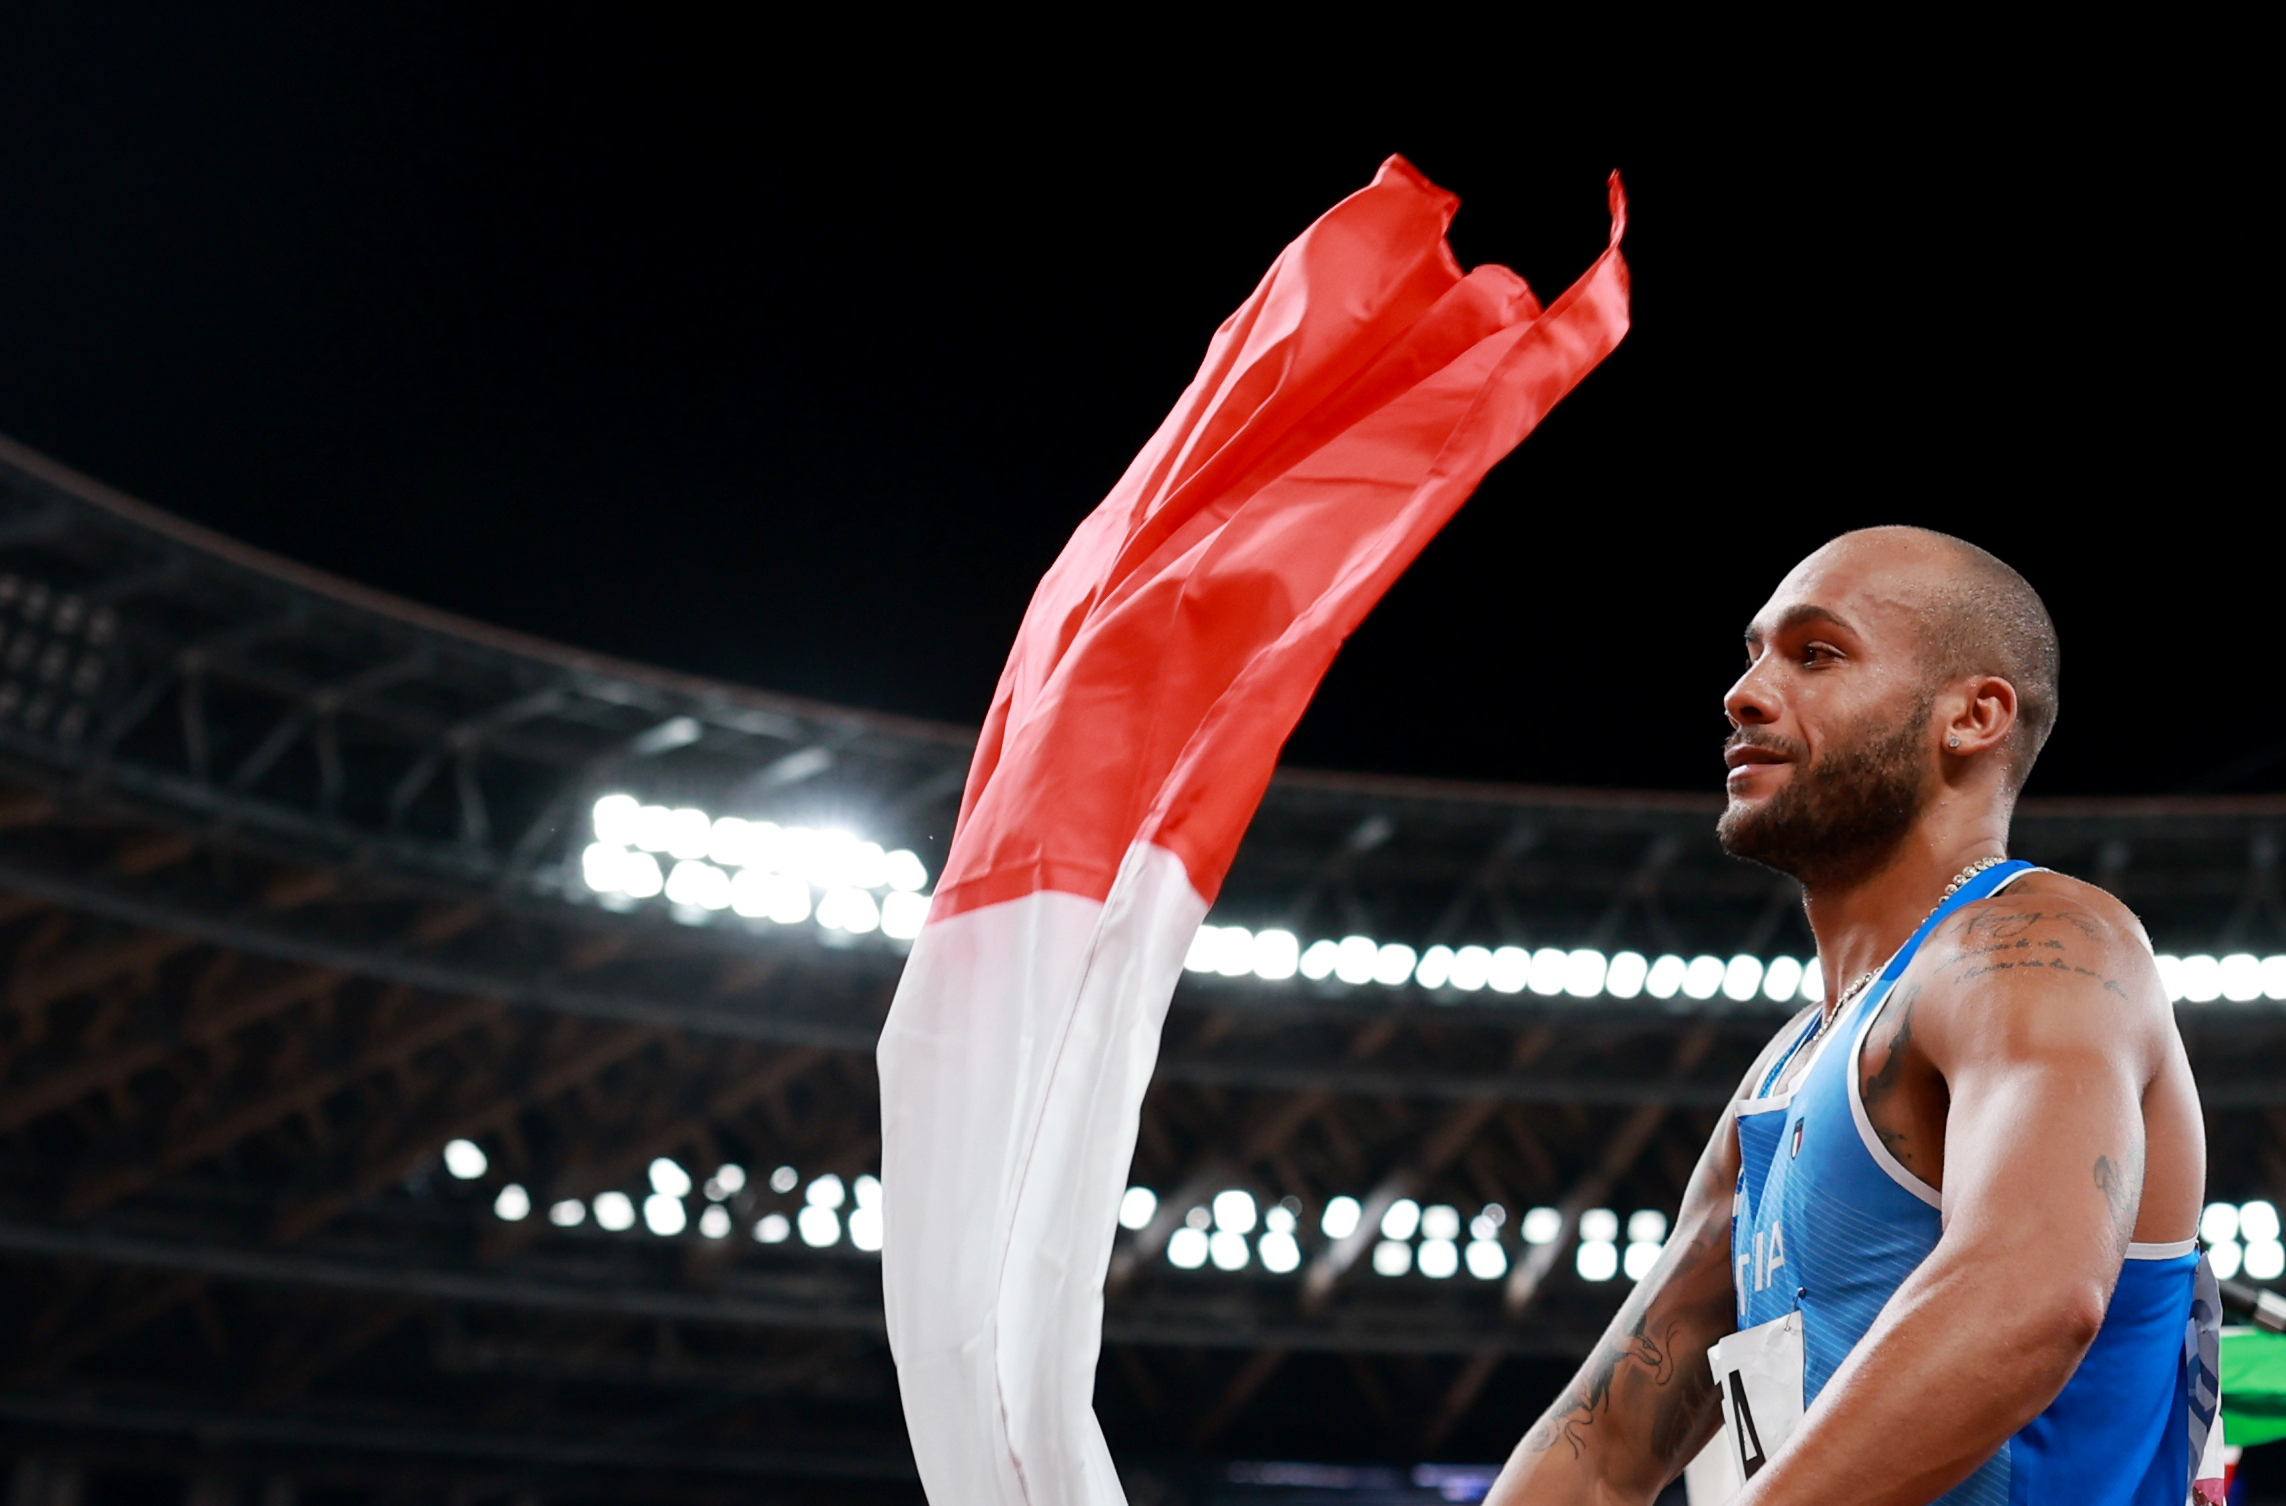 Tokyo 2020 Olympics - Athletics - Men's 4 x 100m Relay - Final - Olympic Stadium, Tokyo, Japan - August 6, 2021. Lamont Marcell Jacobs of Italy celebrates with his national flag after winning gold REUTERS/Kai Pfaffenbach